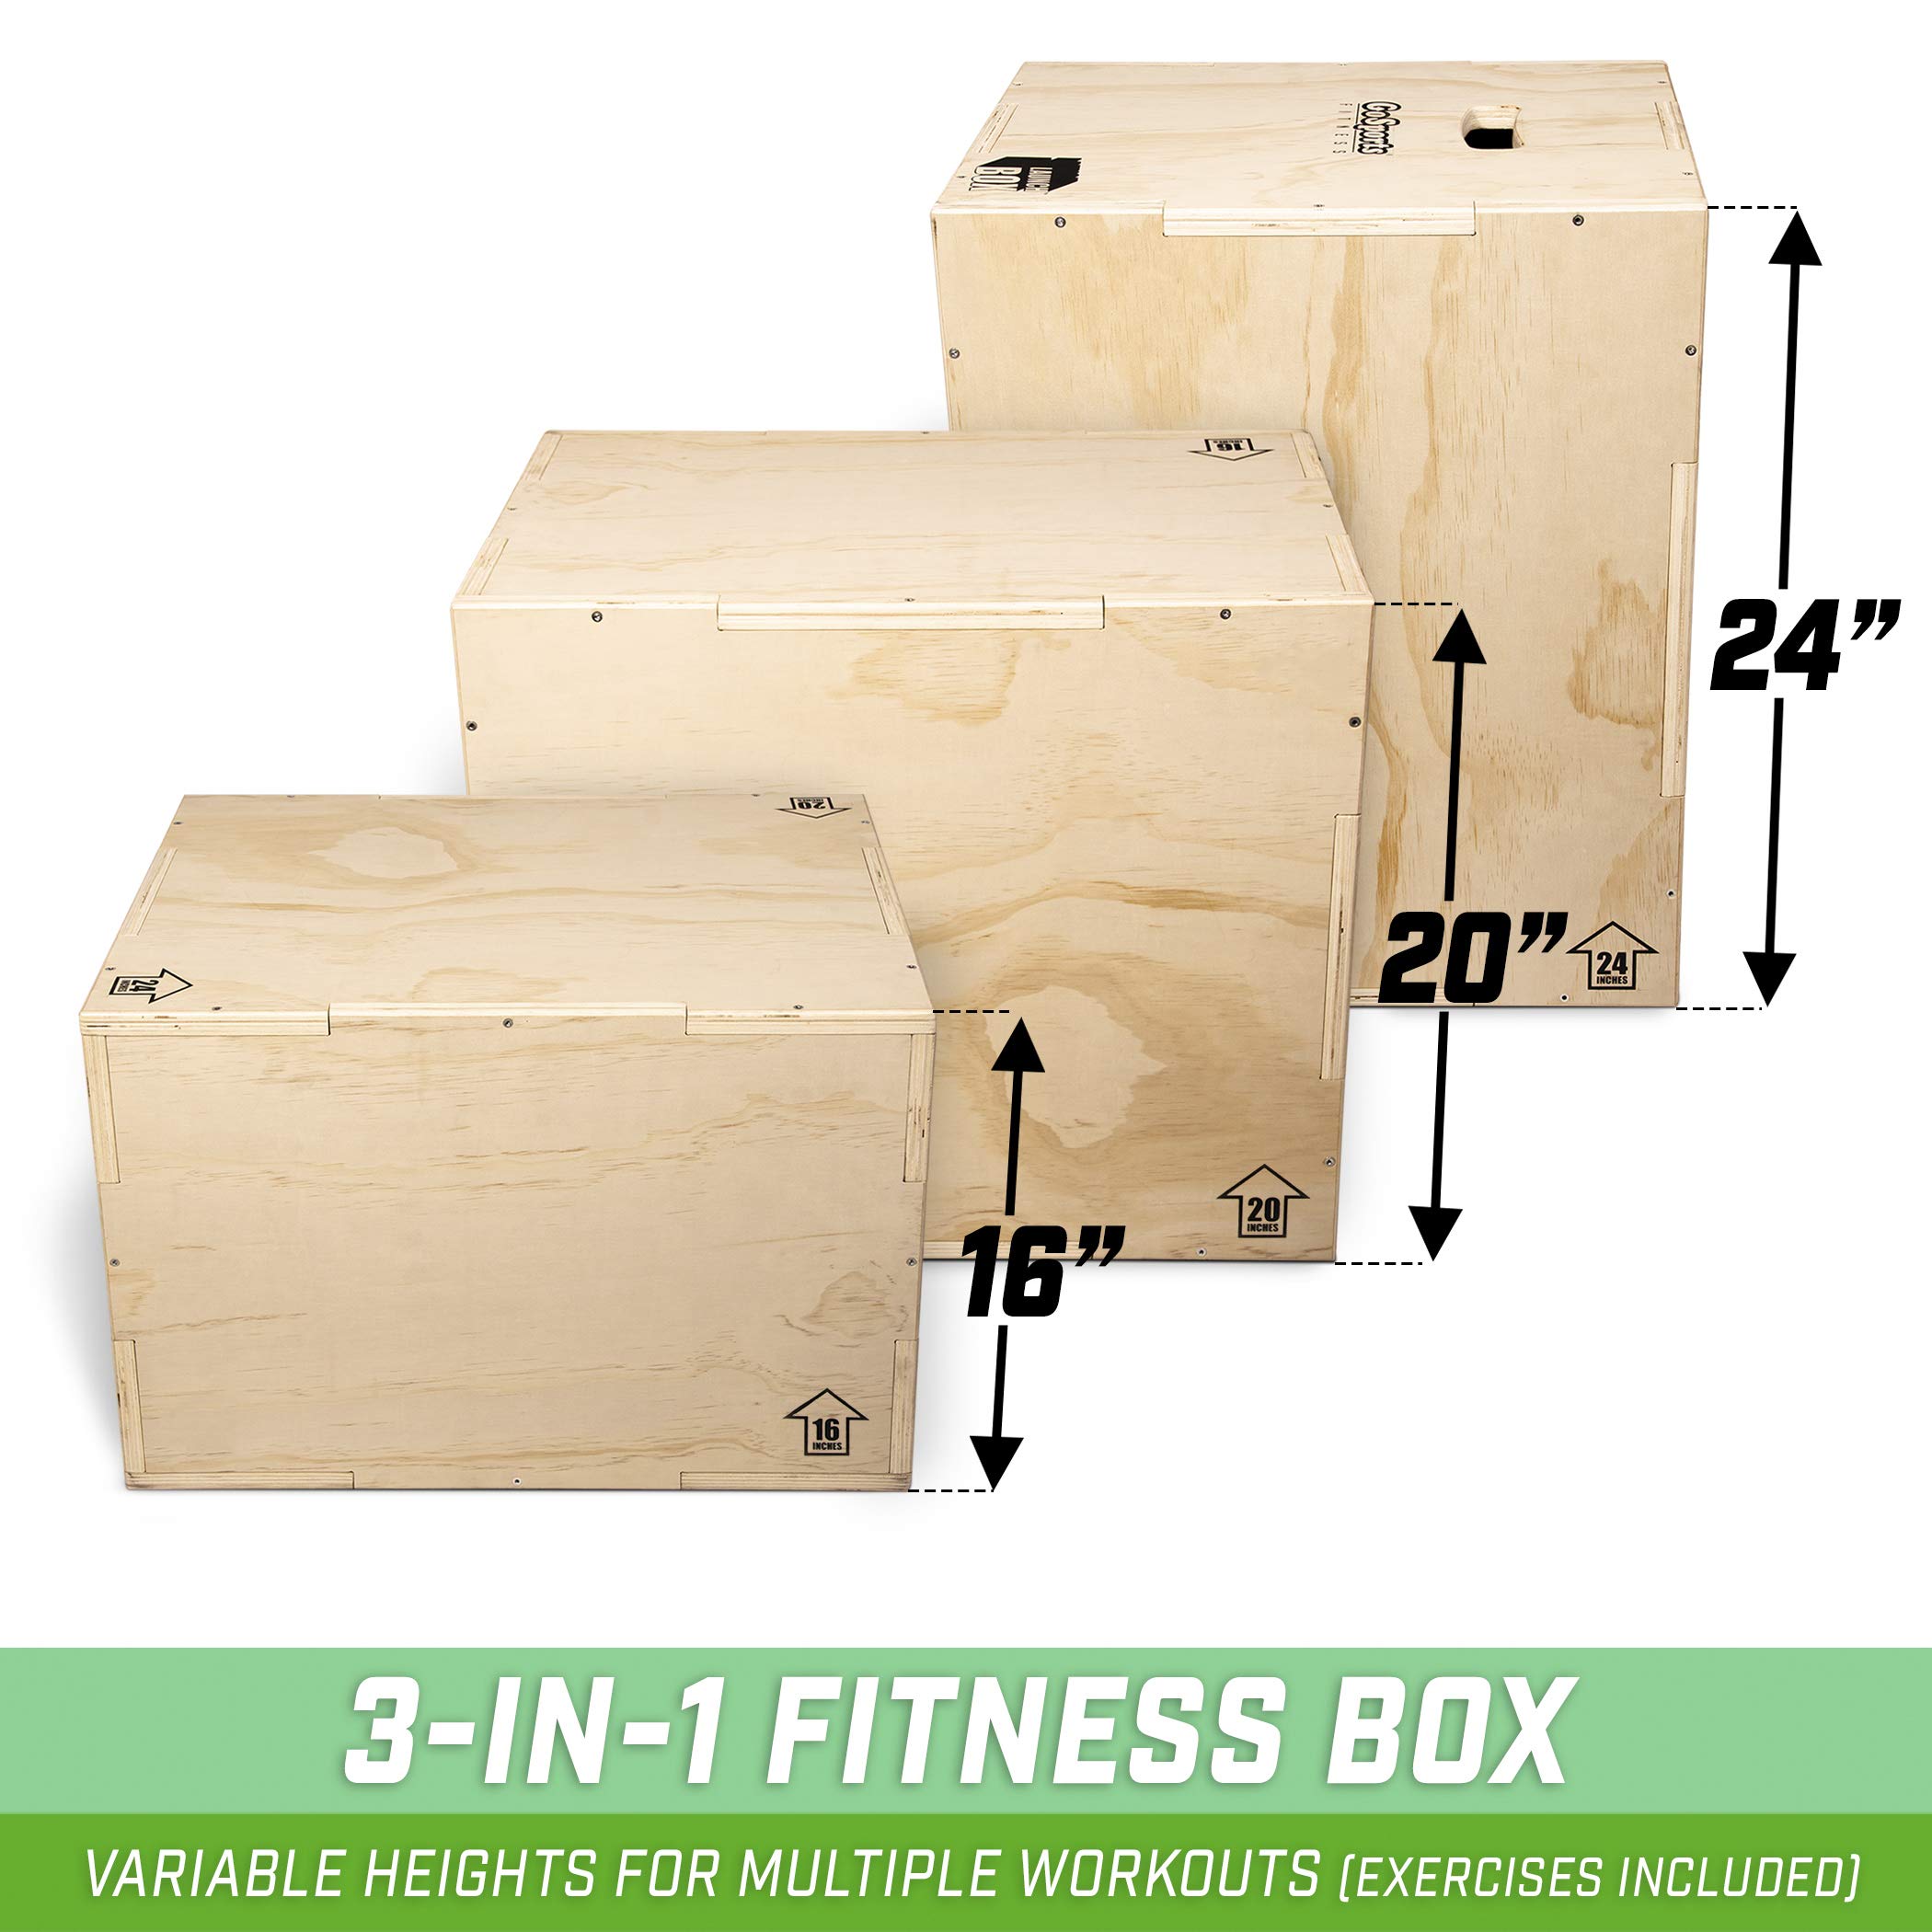 GoSports Fitness Launch Box - 3-in-1 Plyo Jump Box for Exercises of All Skill Levels